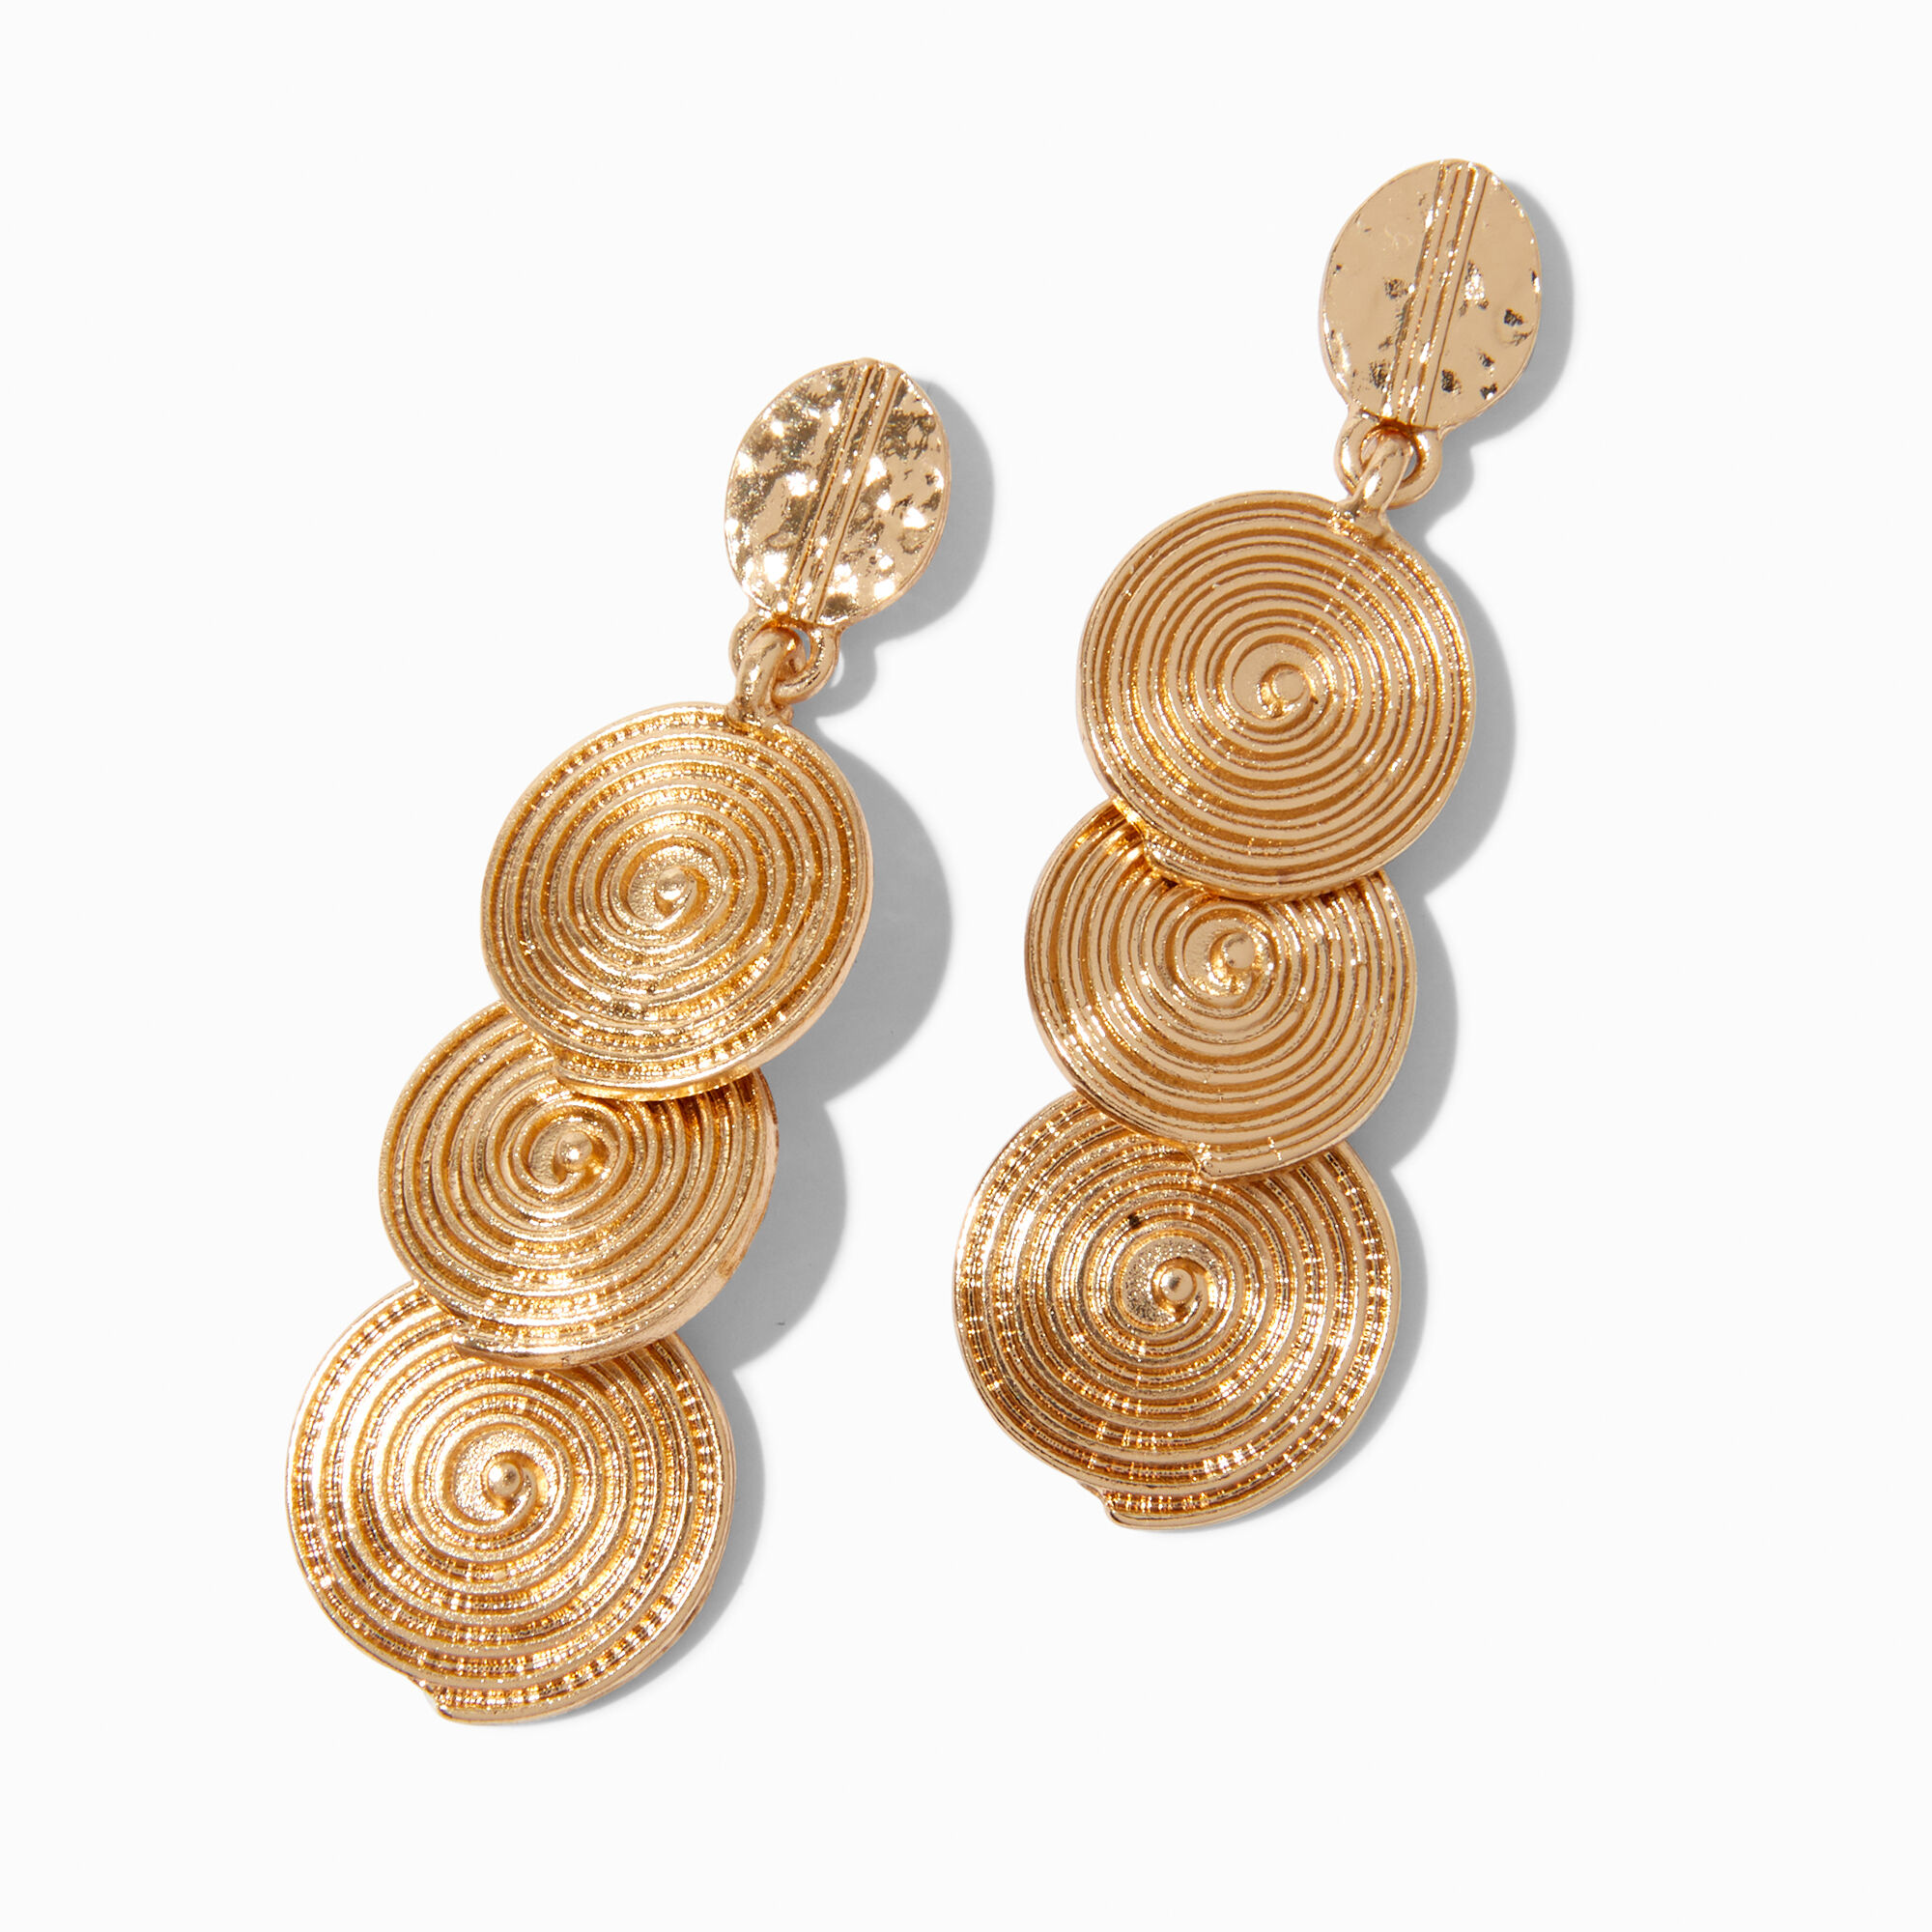 View Claires Tone Triple Spiral 2 Drop Earrings Gold information